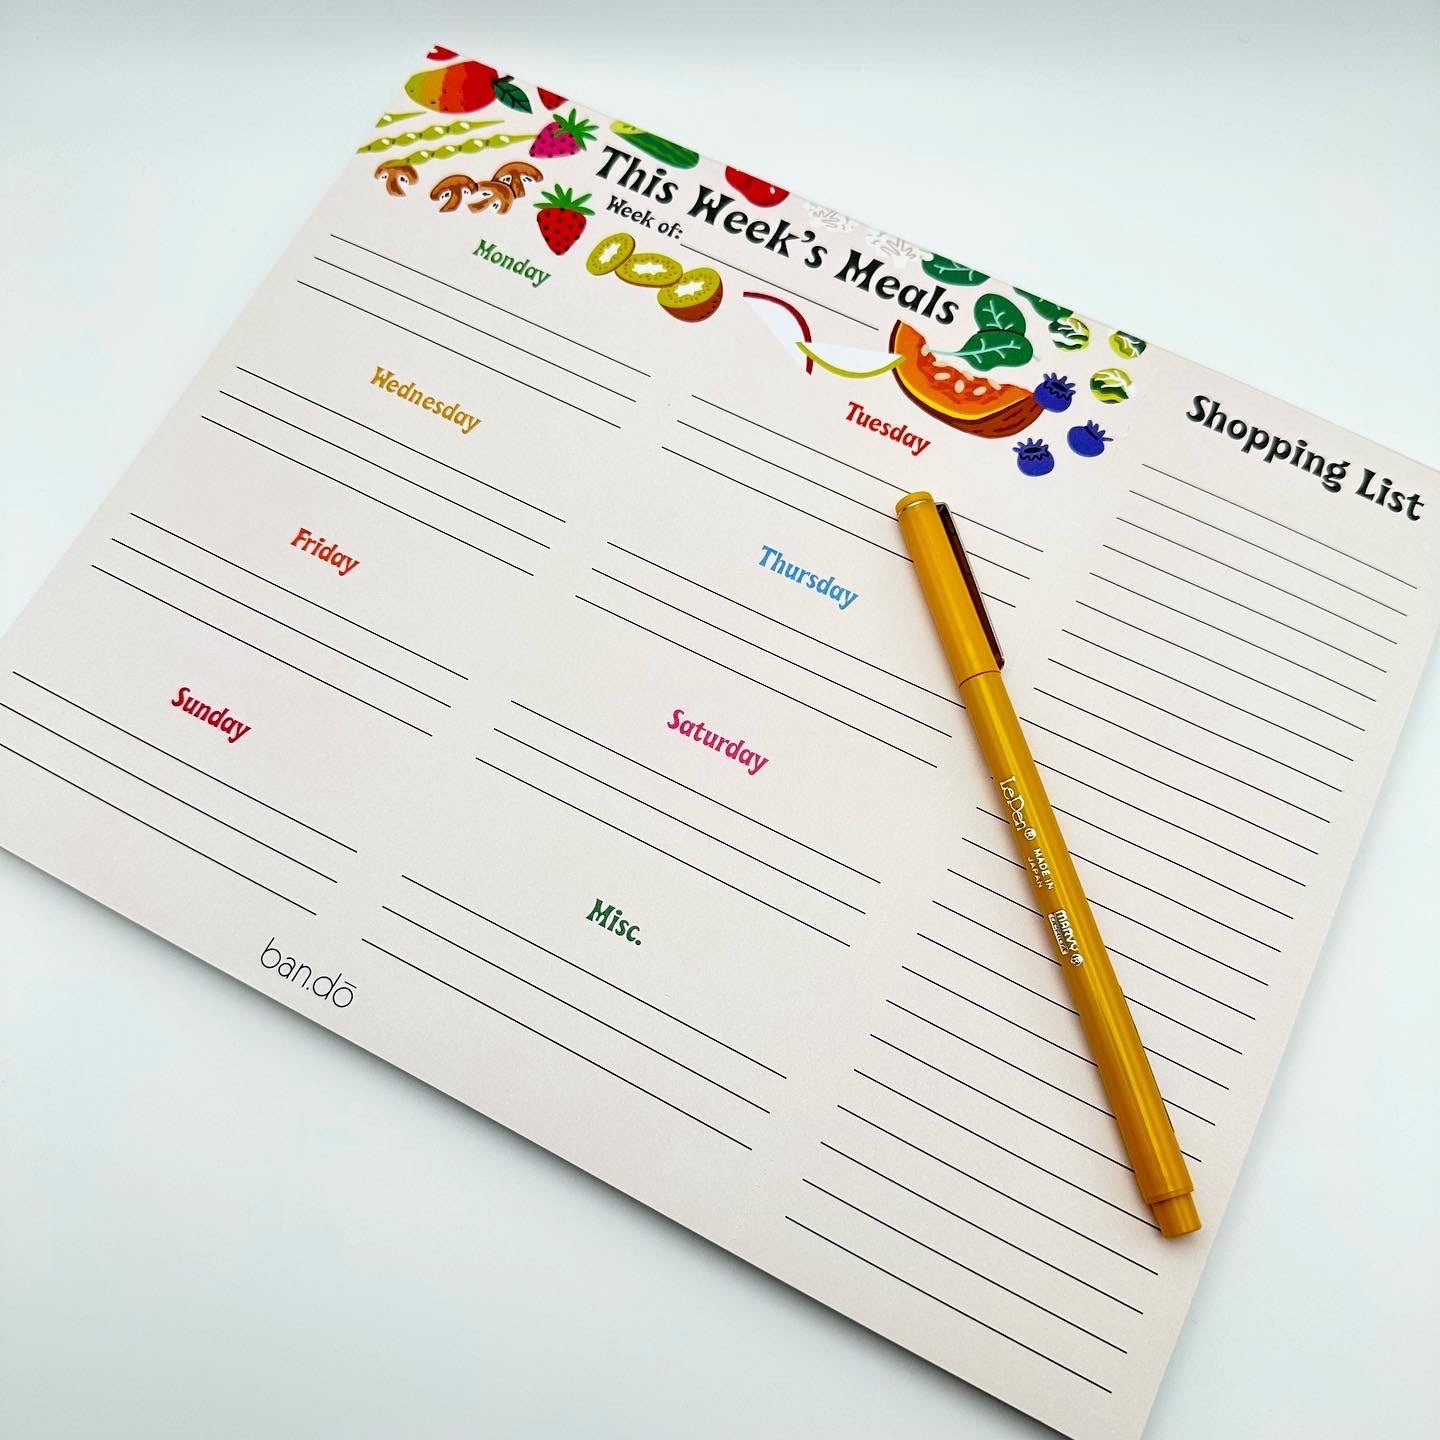 Notepad for weekly meal planning. Has sections for each day, as well as a miscellaneous section and a shopping list you can remove separately to take with you. It is decorated with various fruits and vegetables at the top.